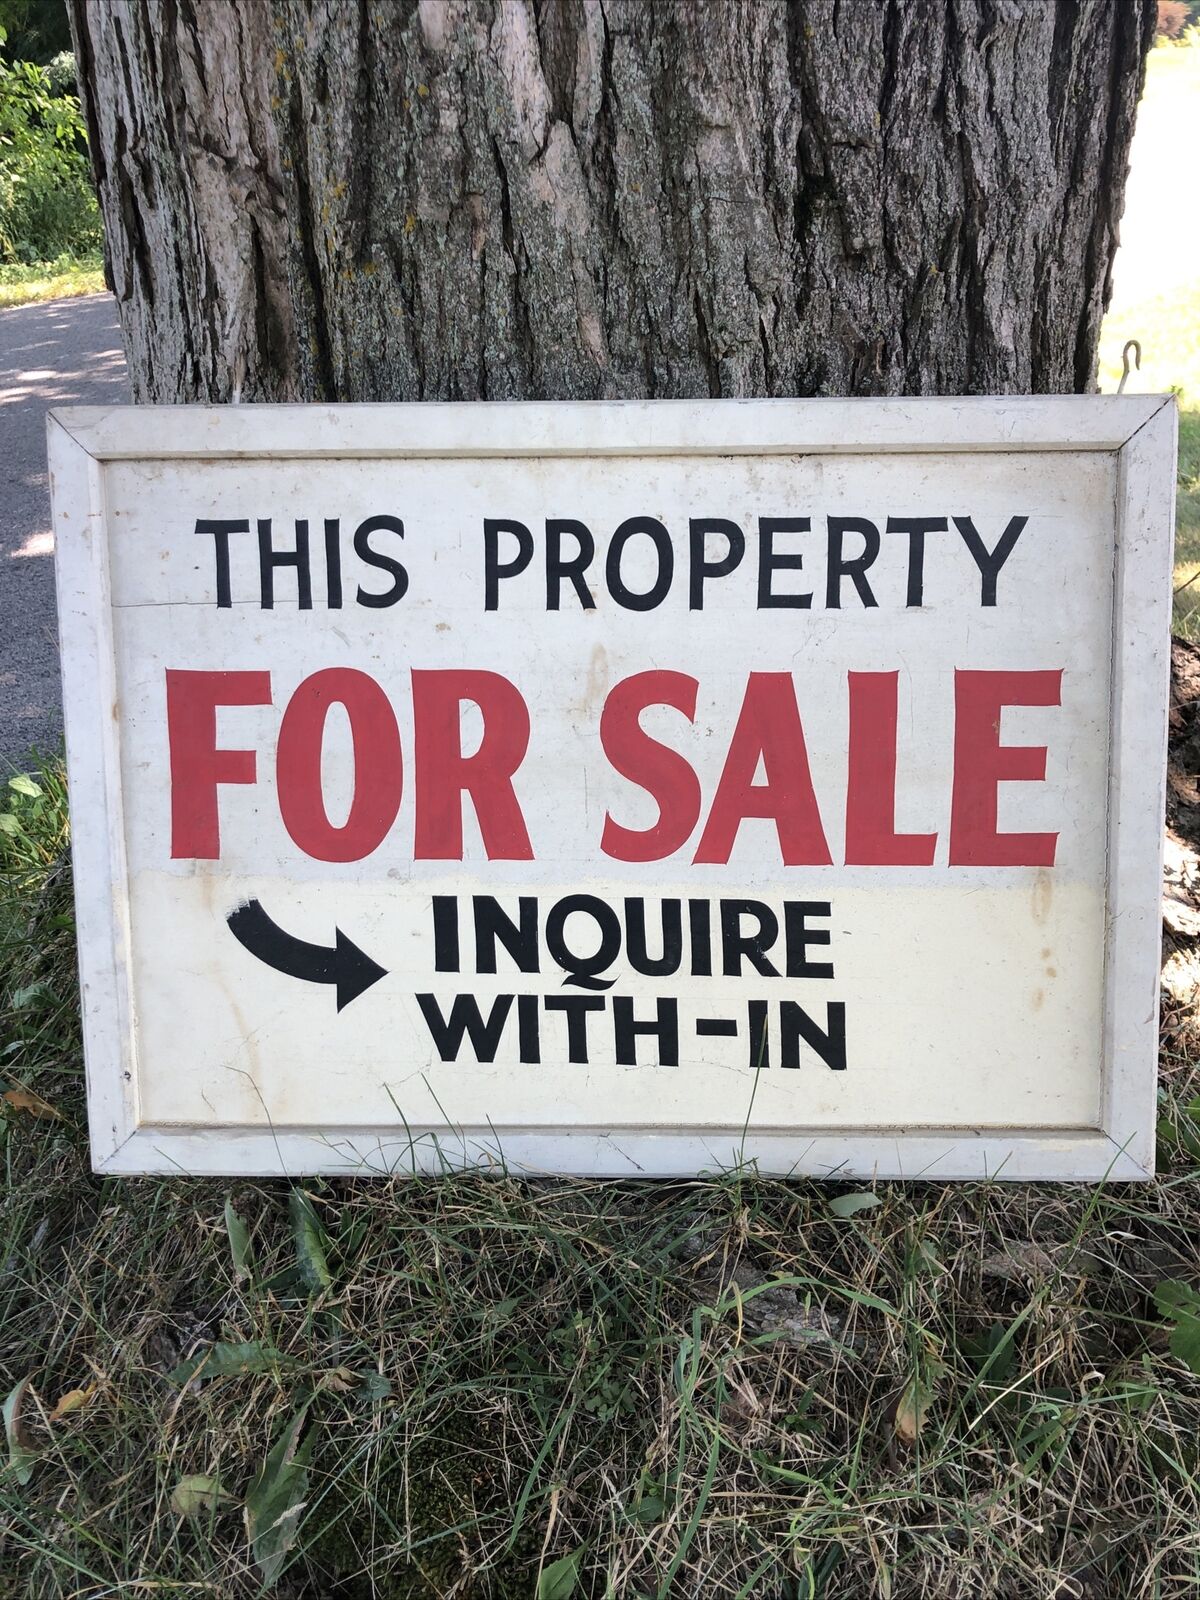 Vintage PROPERTY FOR SALE Double Sided Wooden Sign Aprox. 30”x20” BARN FRESH